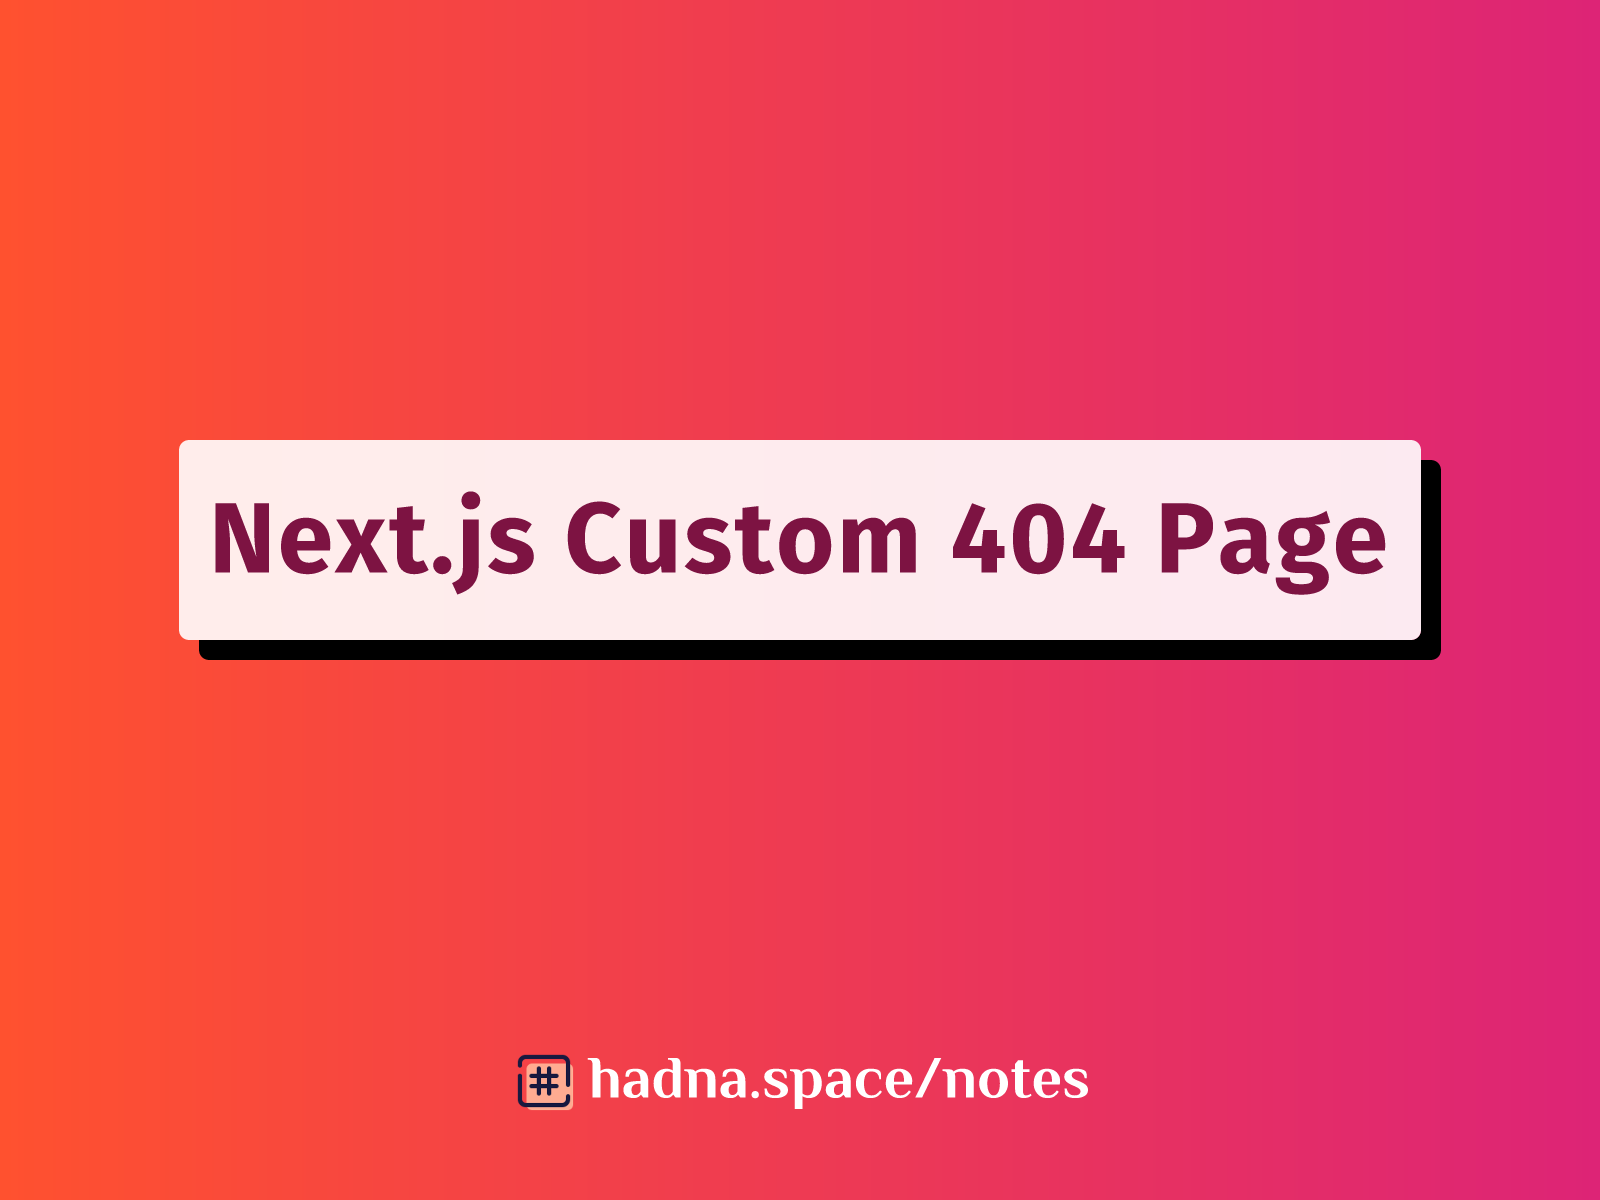 How To Create a Custom 404 Page for Your Next.js Project